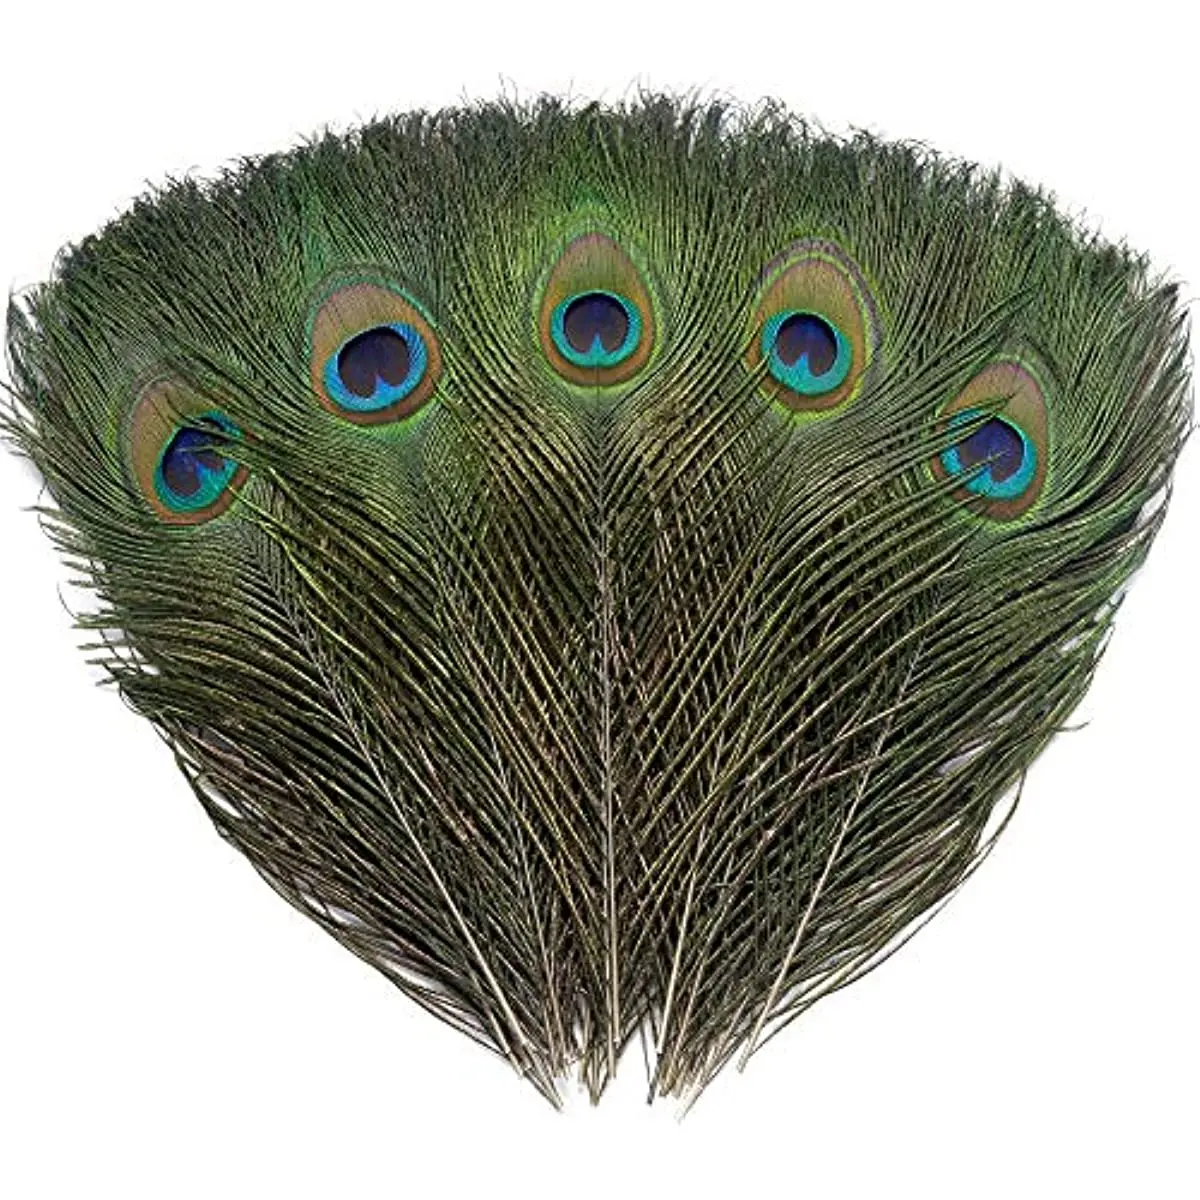 

Natural Peacock Eye Feathers 10-12 Inches Decorative Feather Crafts Wedding Decoration Clothing Accessories